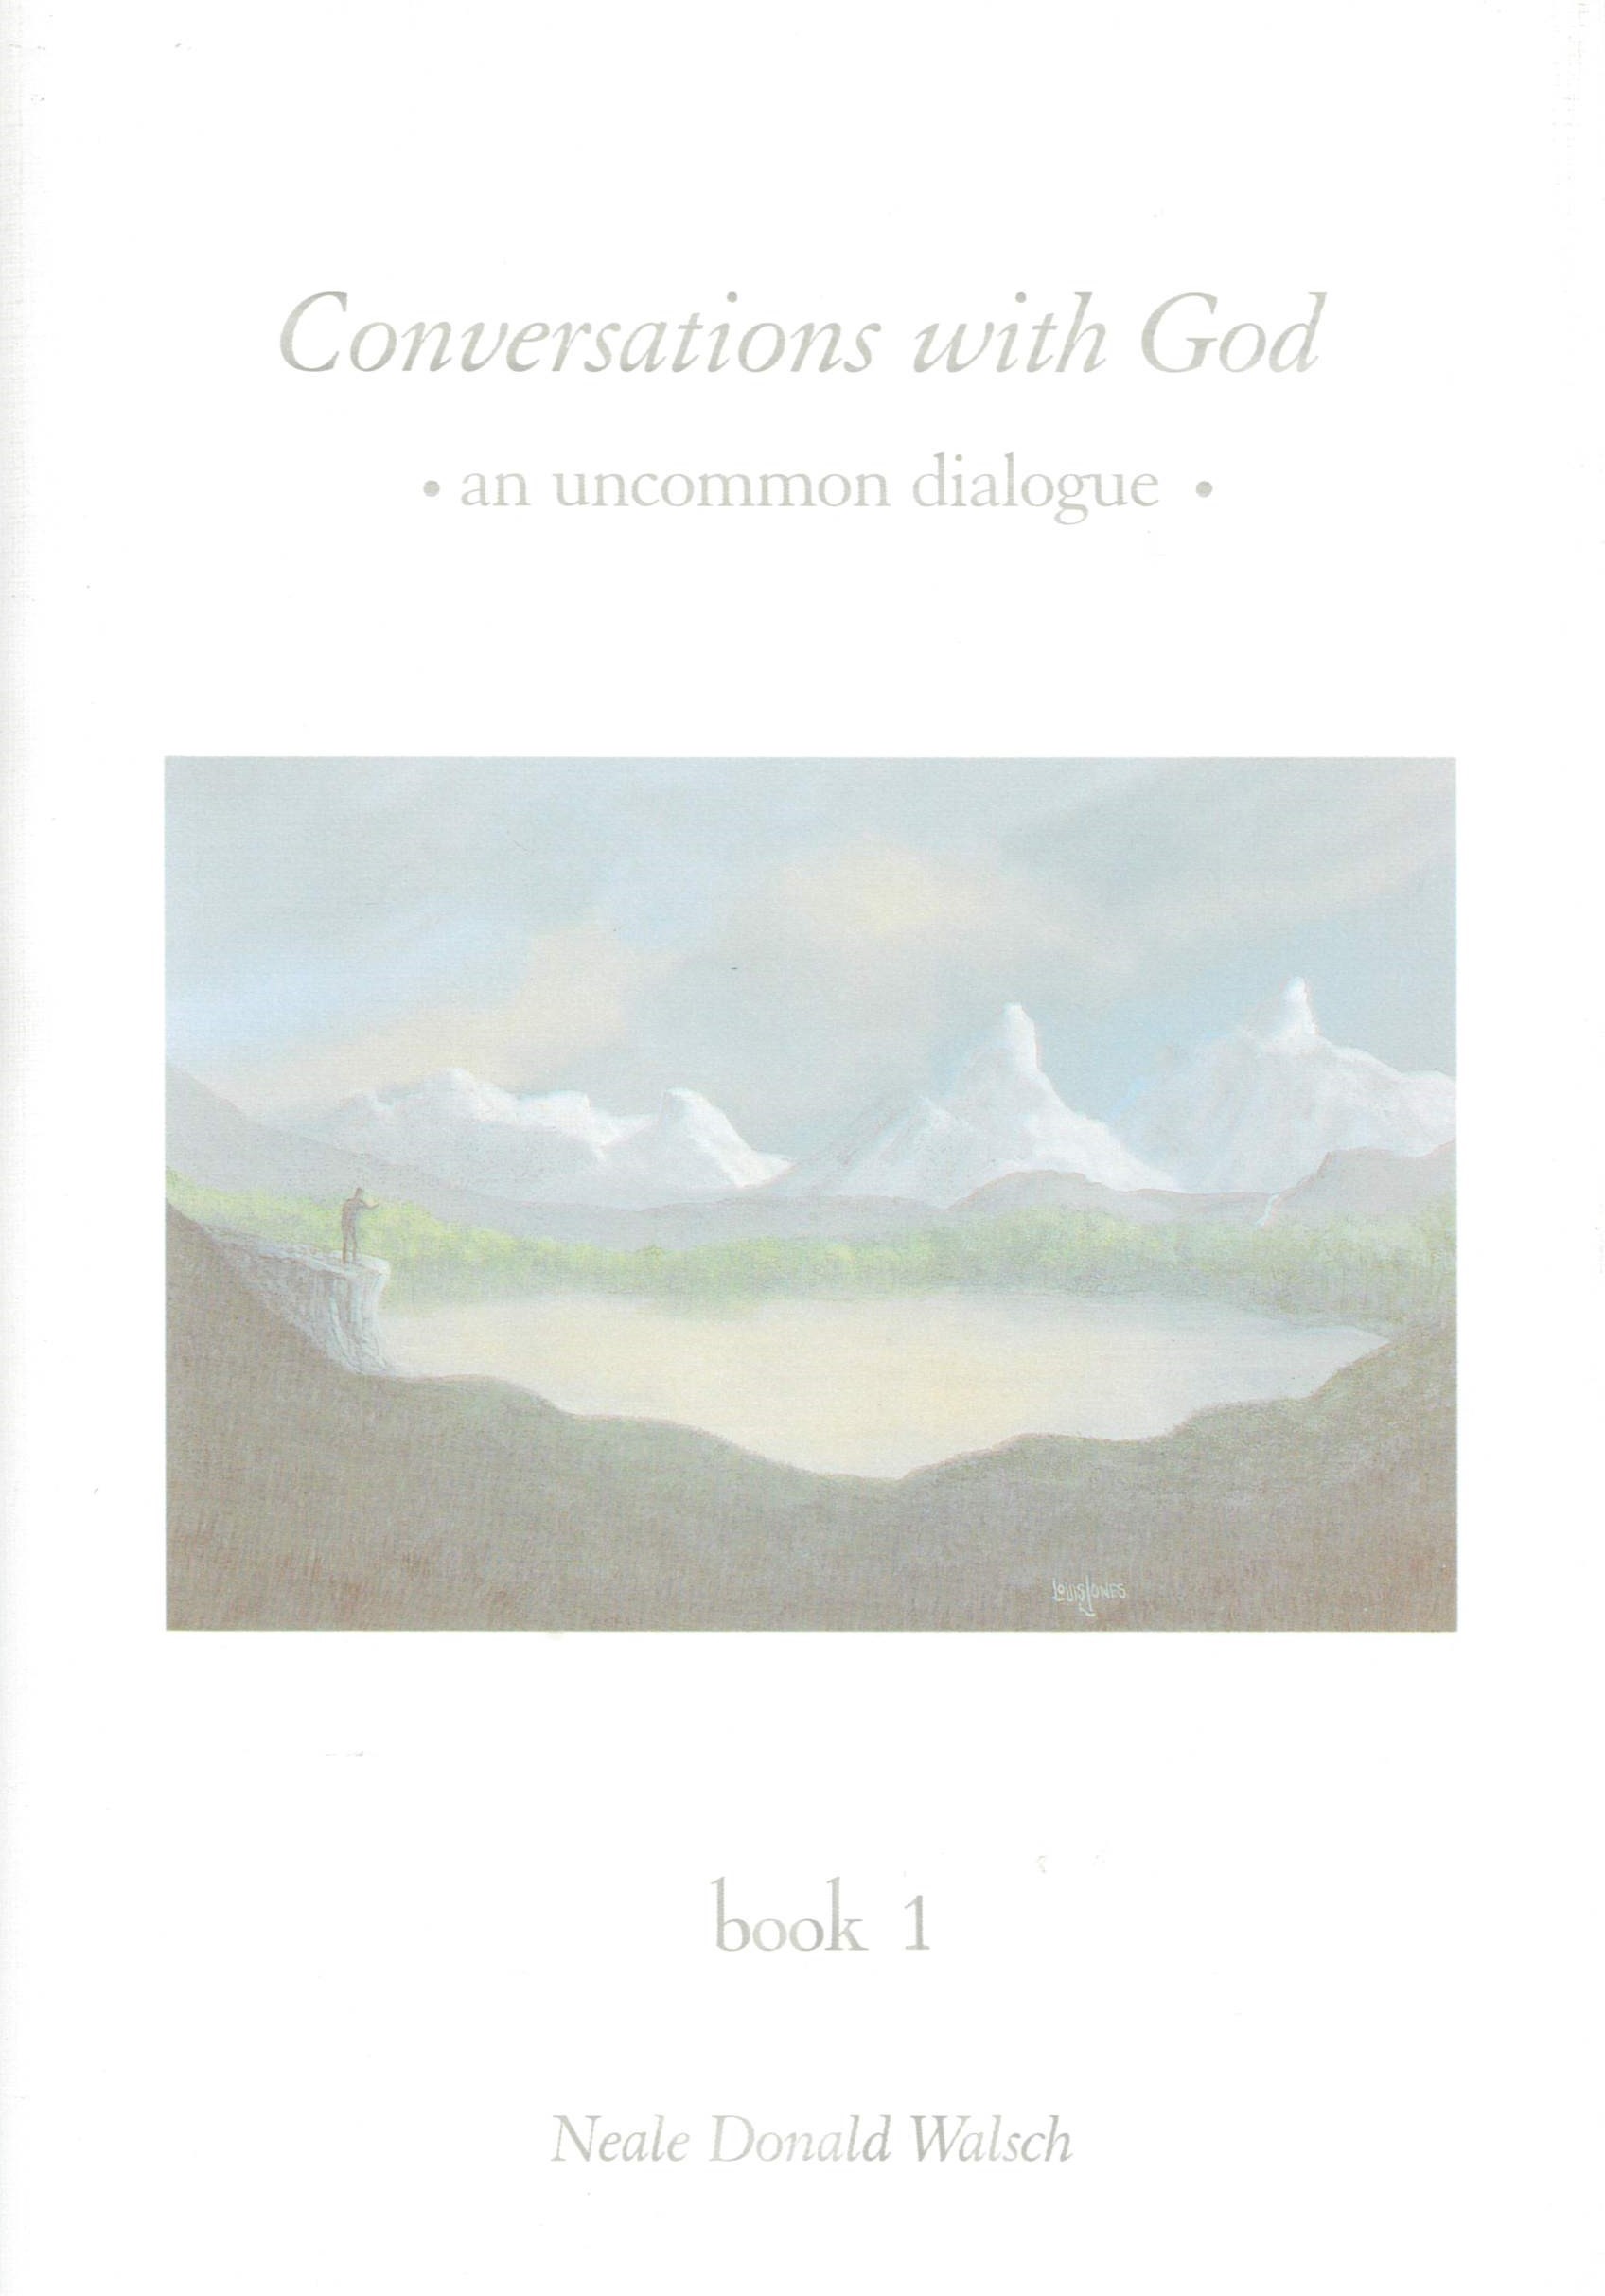 Conversations with God an uncommon dialogue[Book 1]